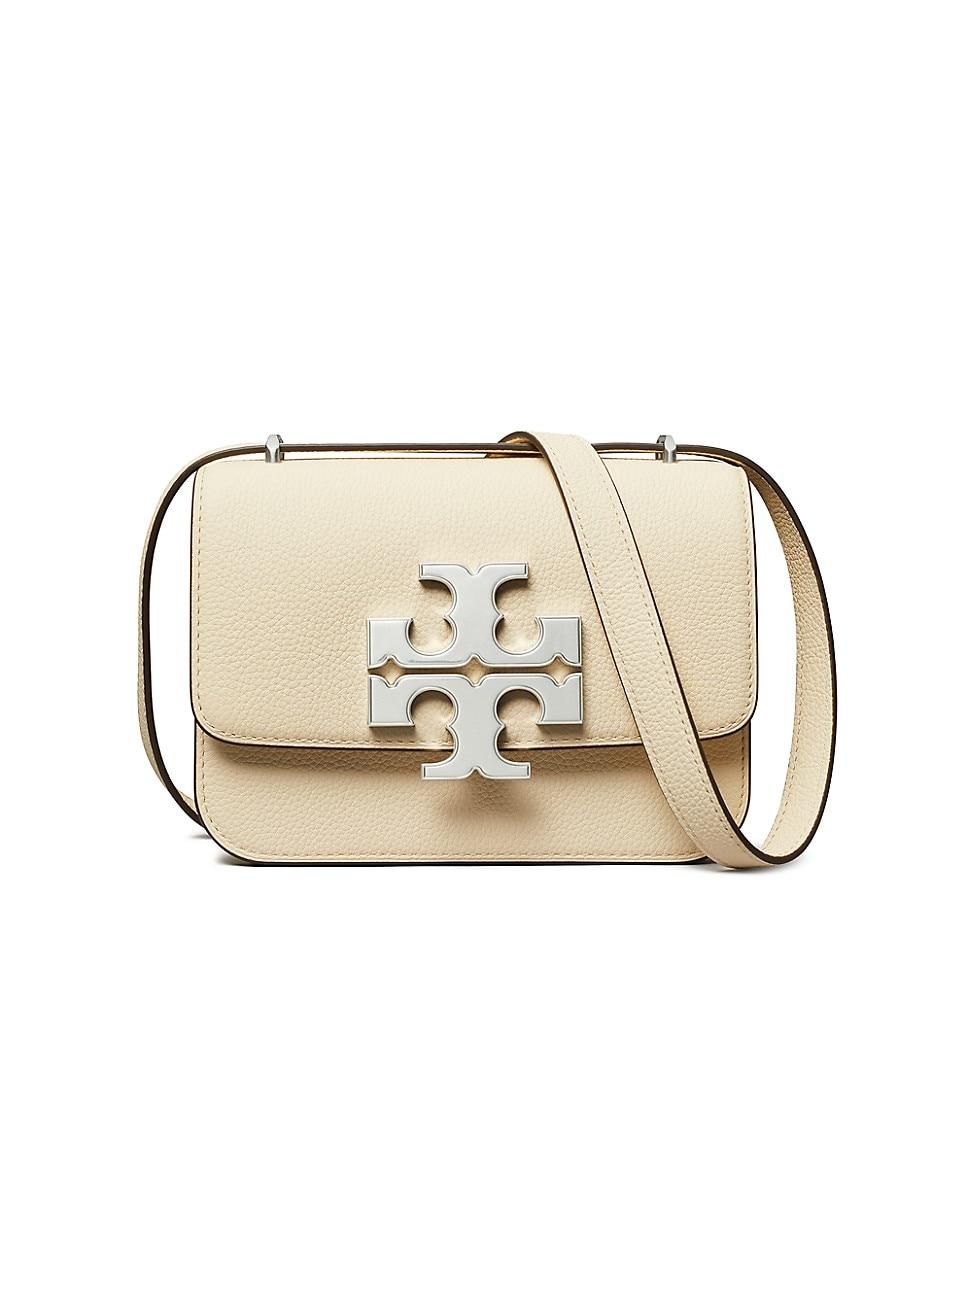 Tory Burch Small Eleanor Pebbled Leather Convertible Shoulder Bag in